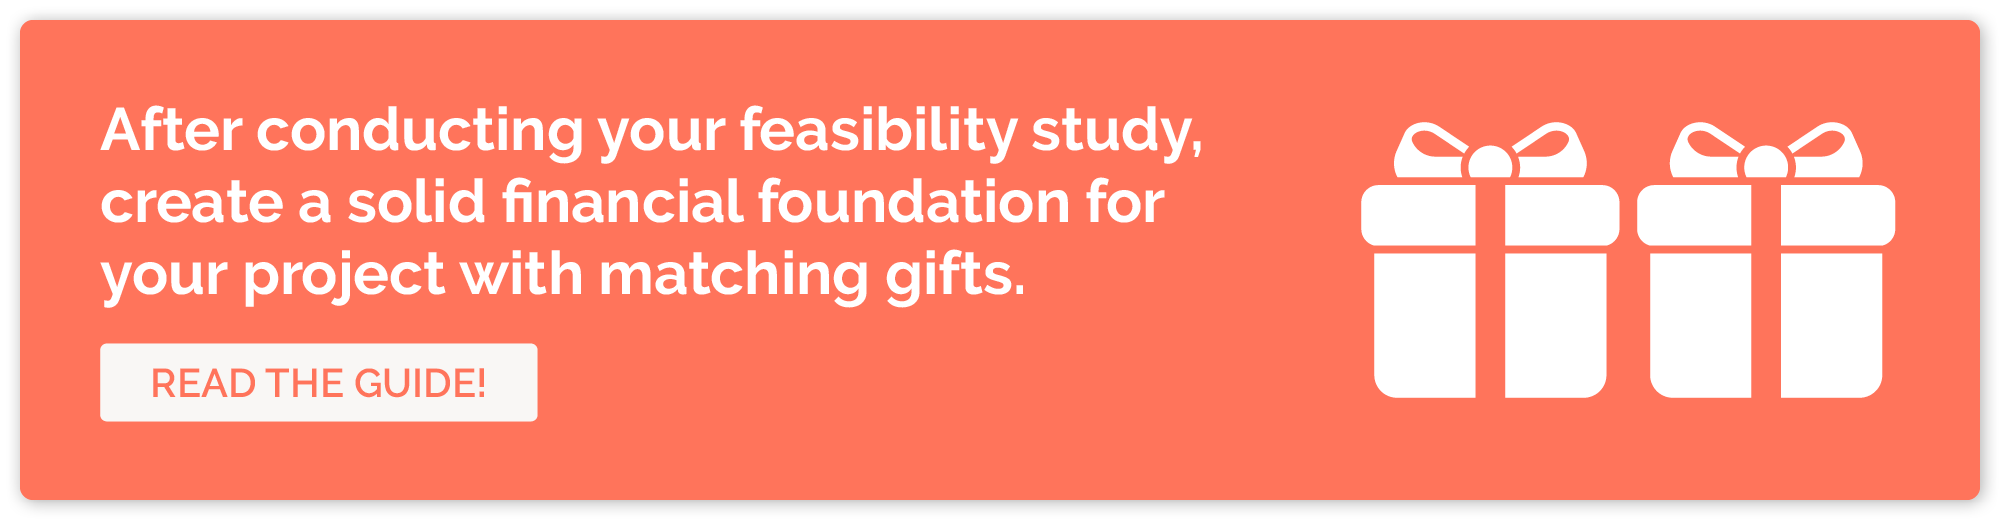 If your fundraising feasibility study shows you need more funding, learn about boosting revenue quickly with matching gifts in this guide.